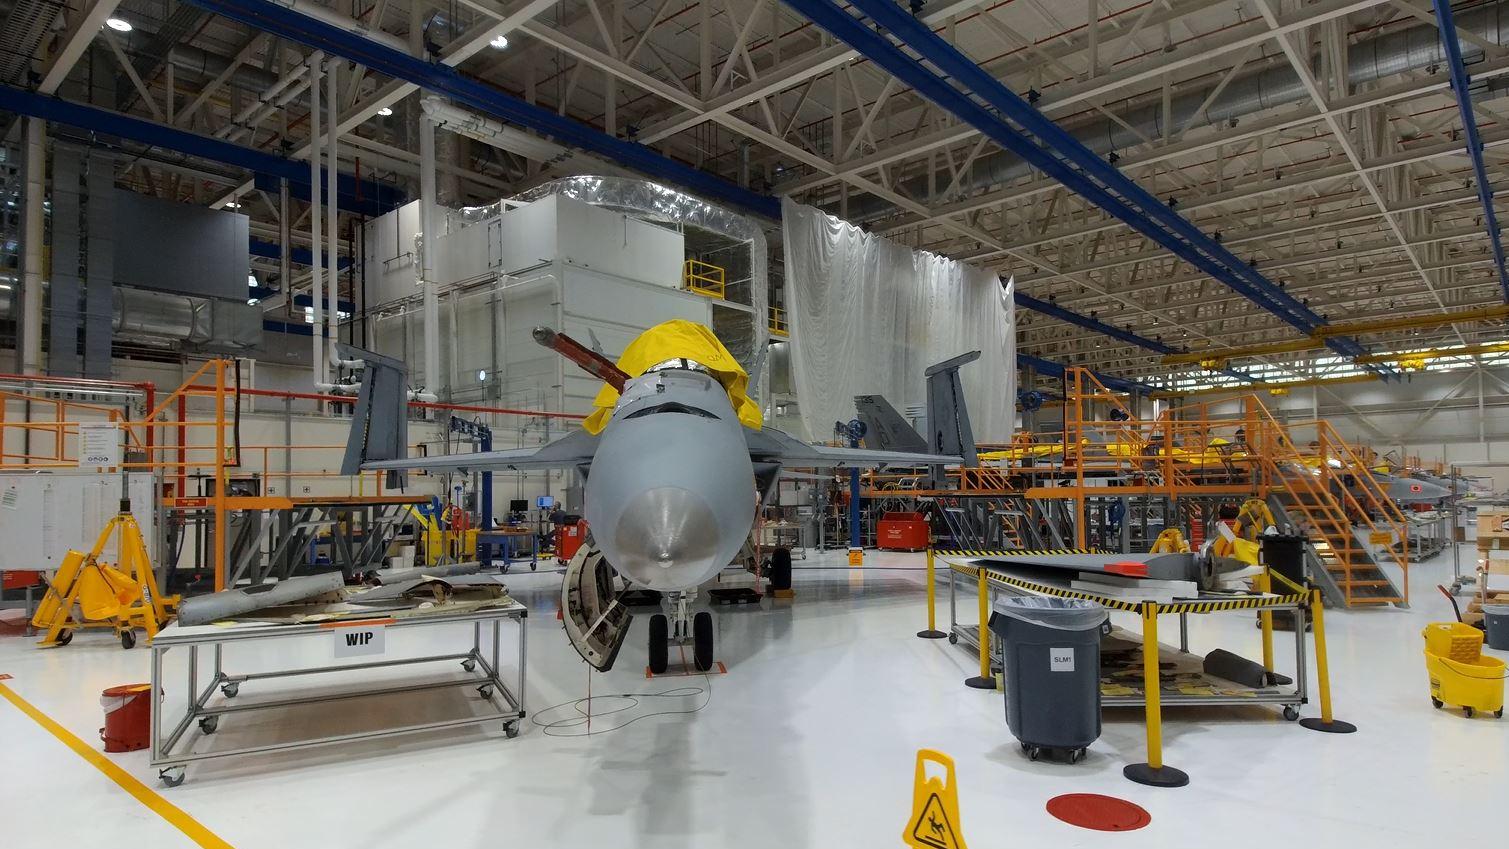 An F/A-18 Super Hornet undergoes Service Life Modification at The Boeing Company's St. Louis facility